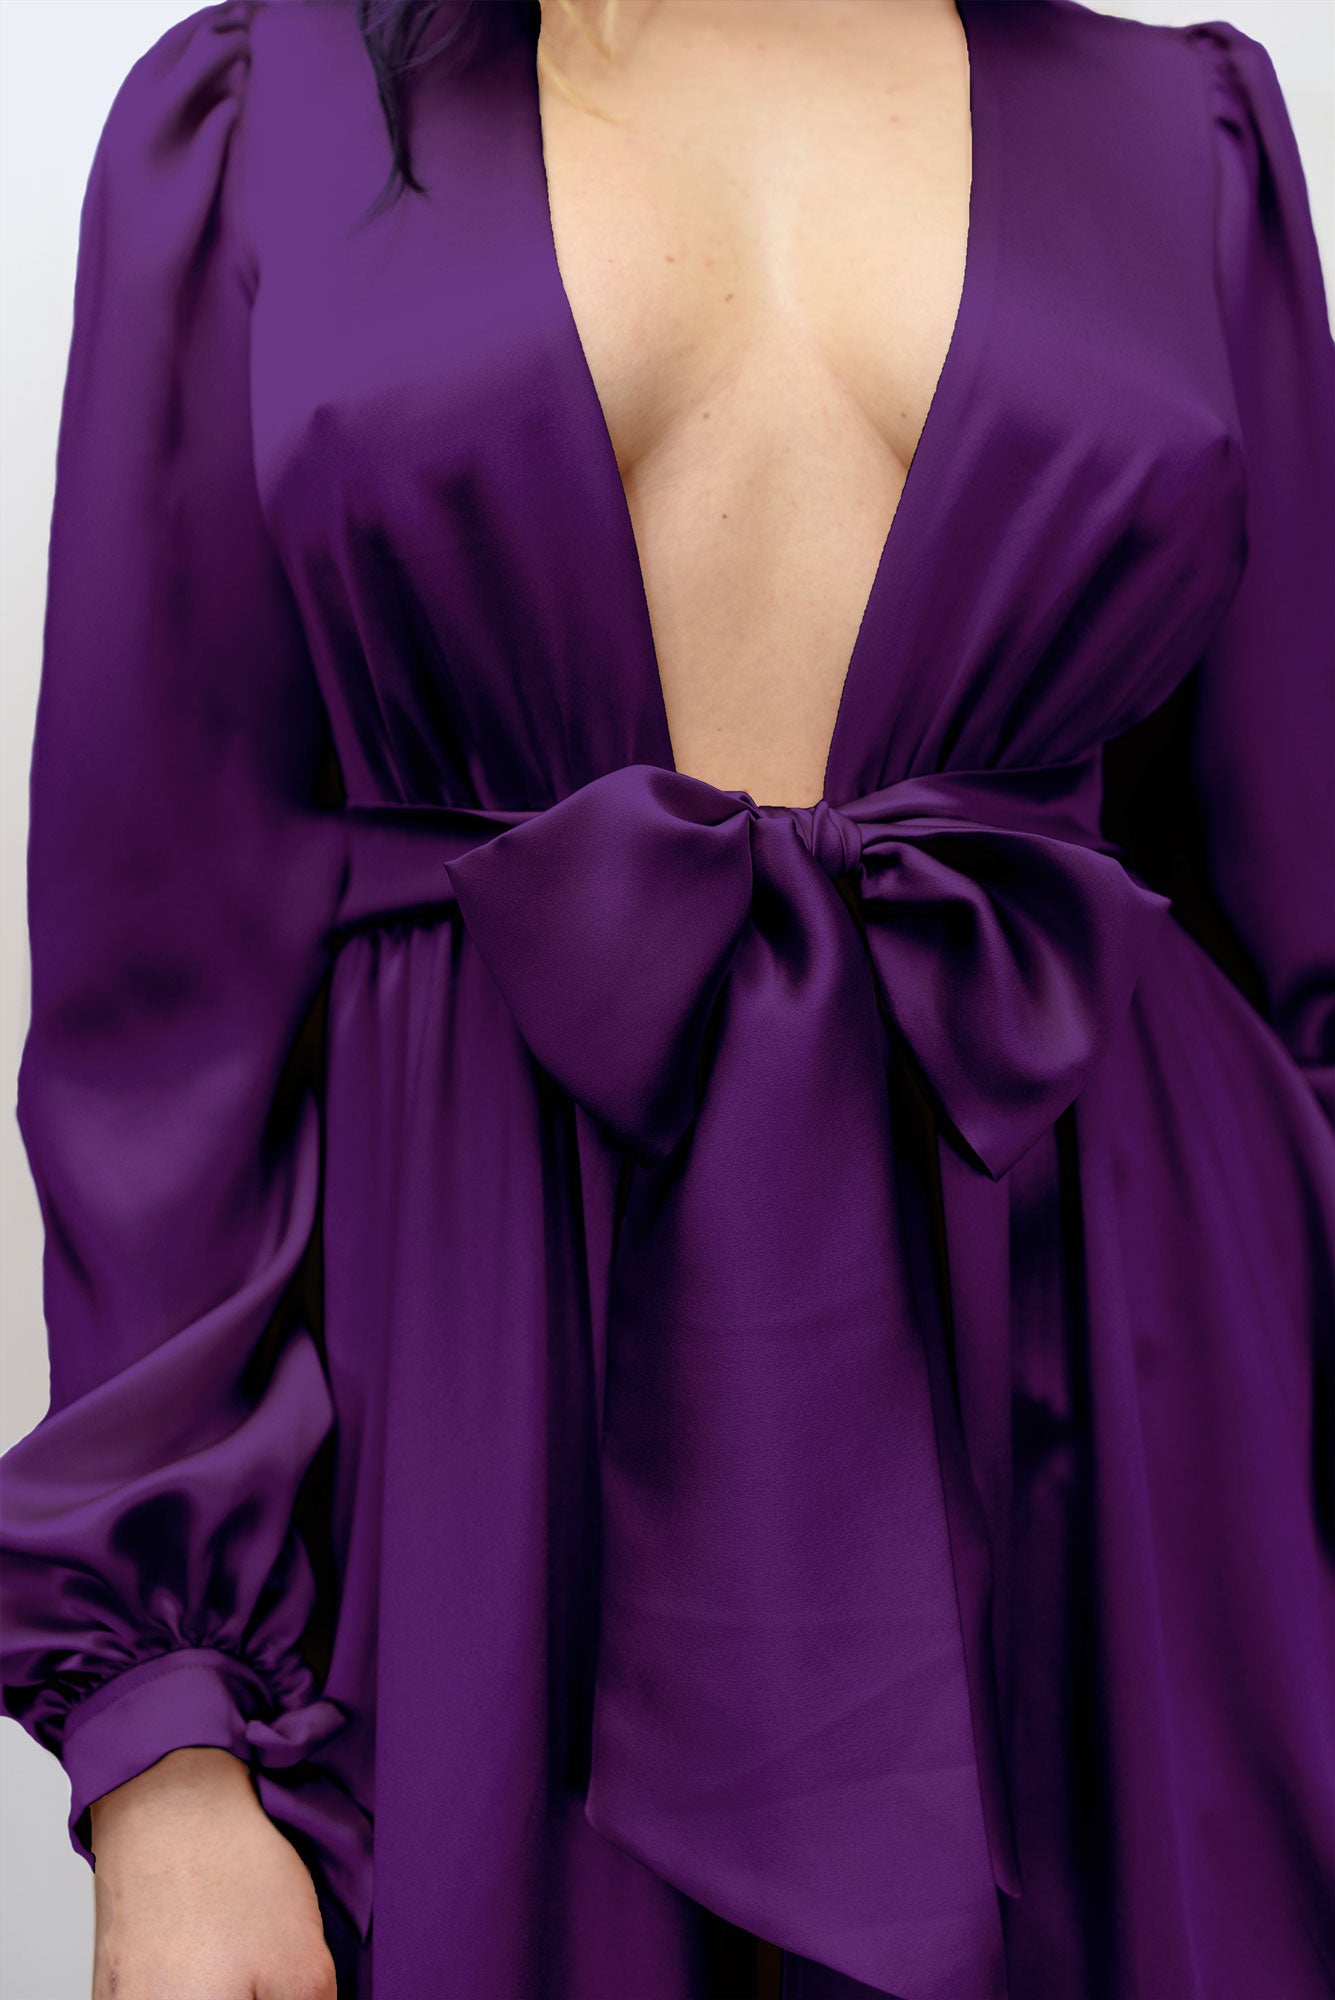 Purple silk dressing gown, handcrafted in 100% pure silk satin